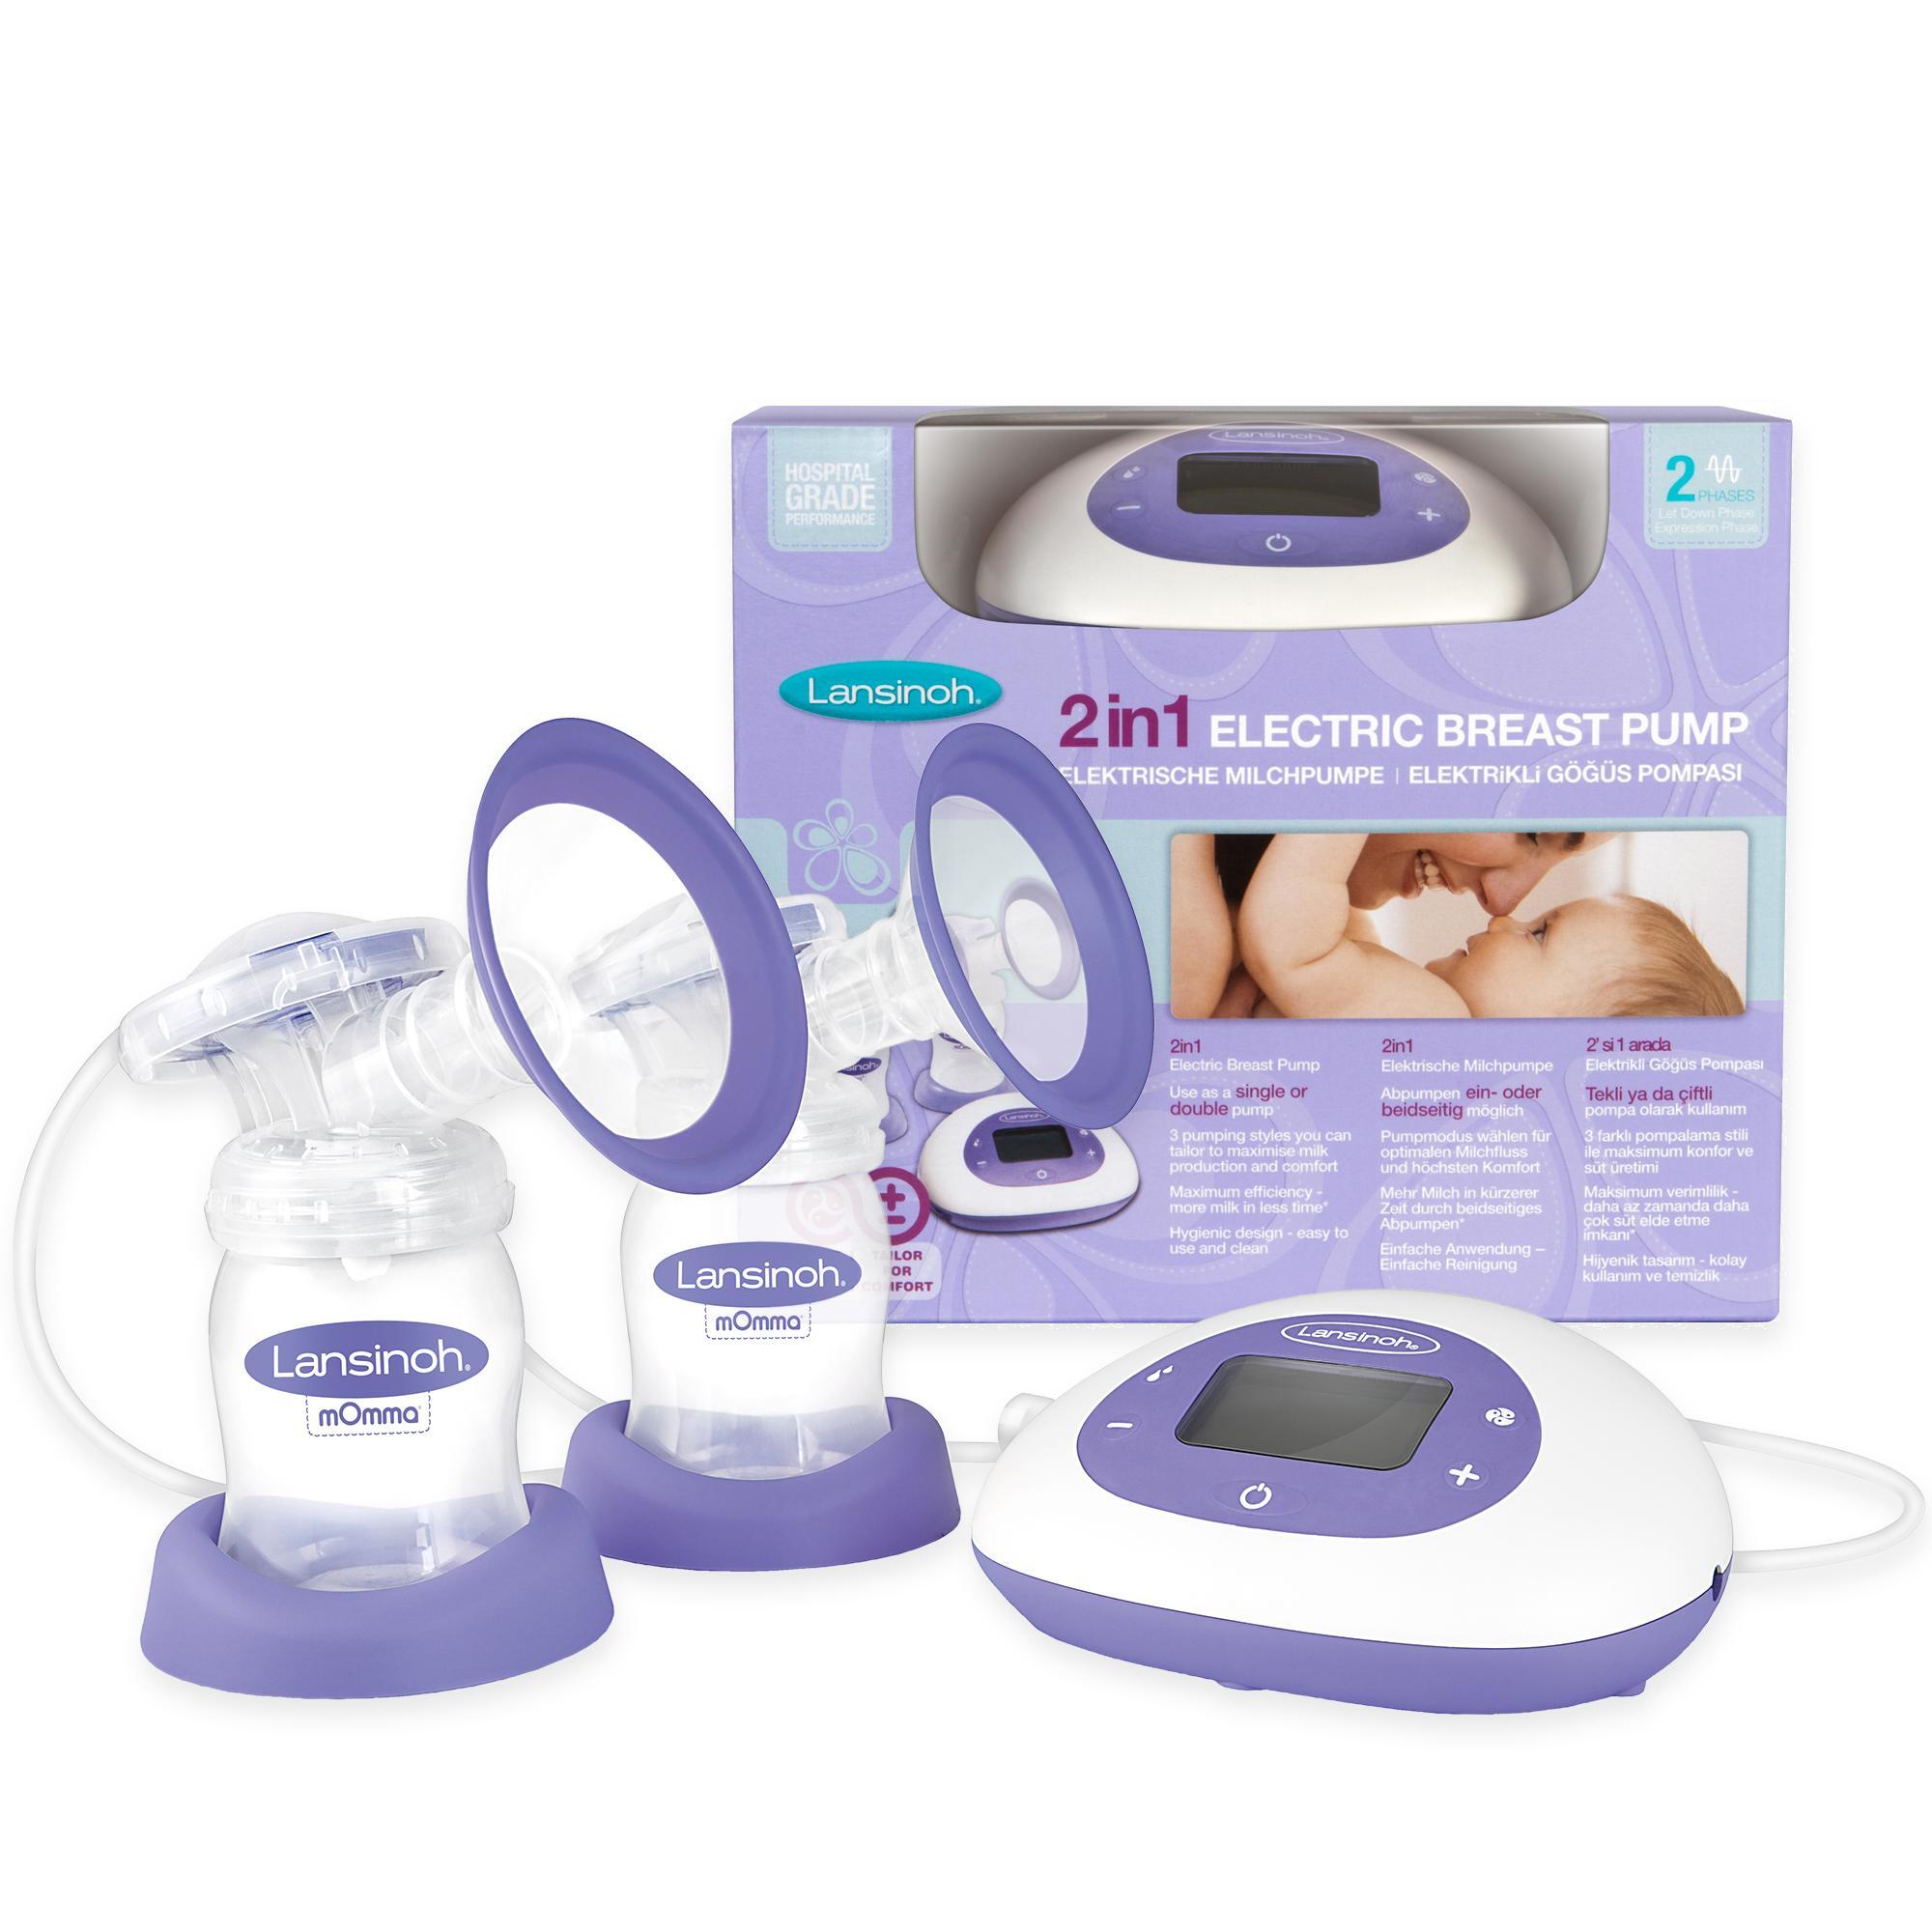 https://www.nordbaby.com/products/images/g120000/121154/breastfeeding-lansinoh-violet-lansinoh-2-in-1-electric-breast-pump-e-121154-47391.jpg